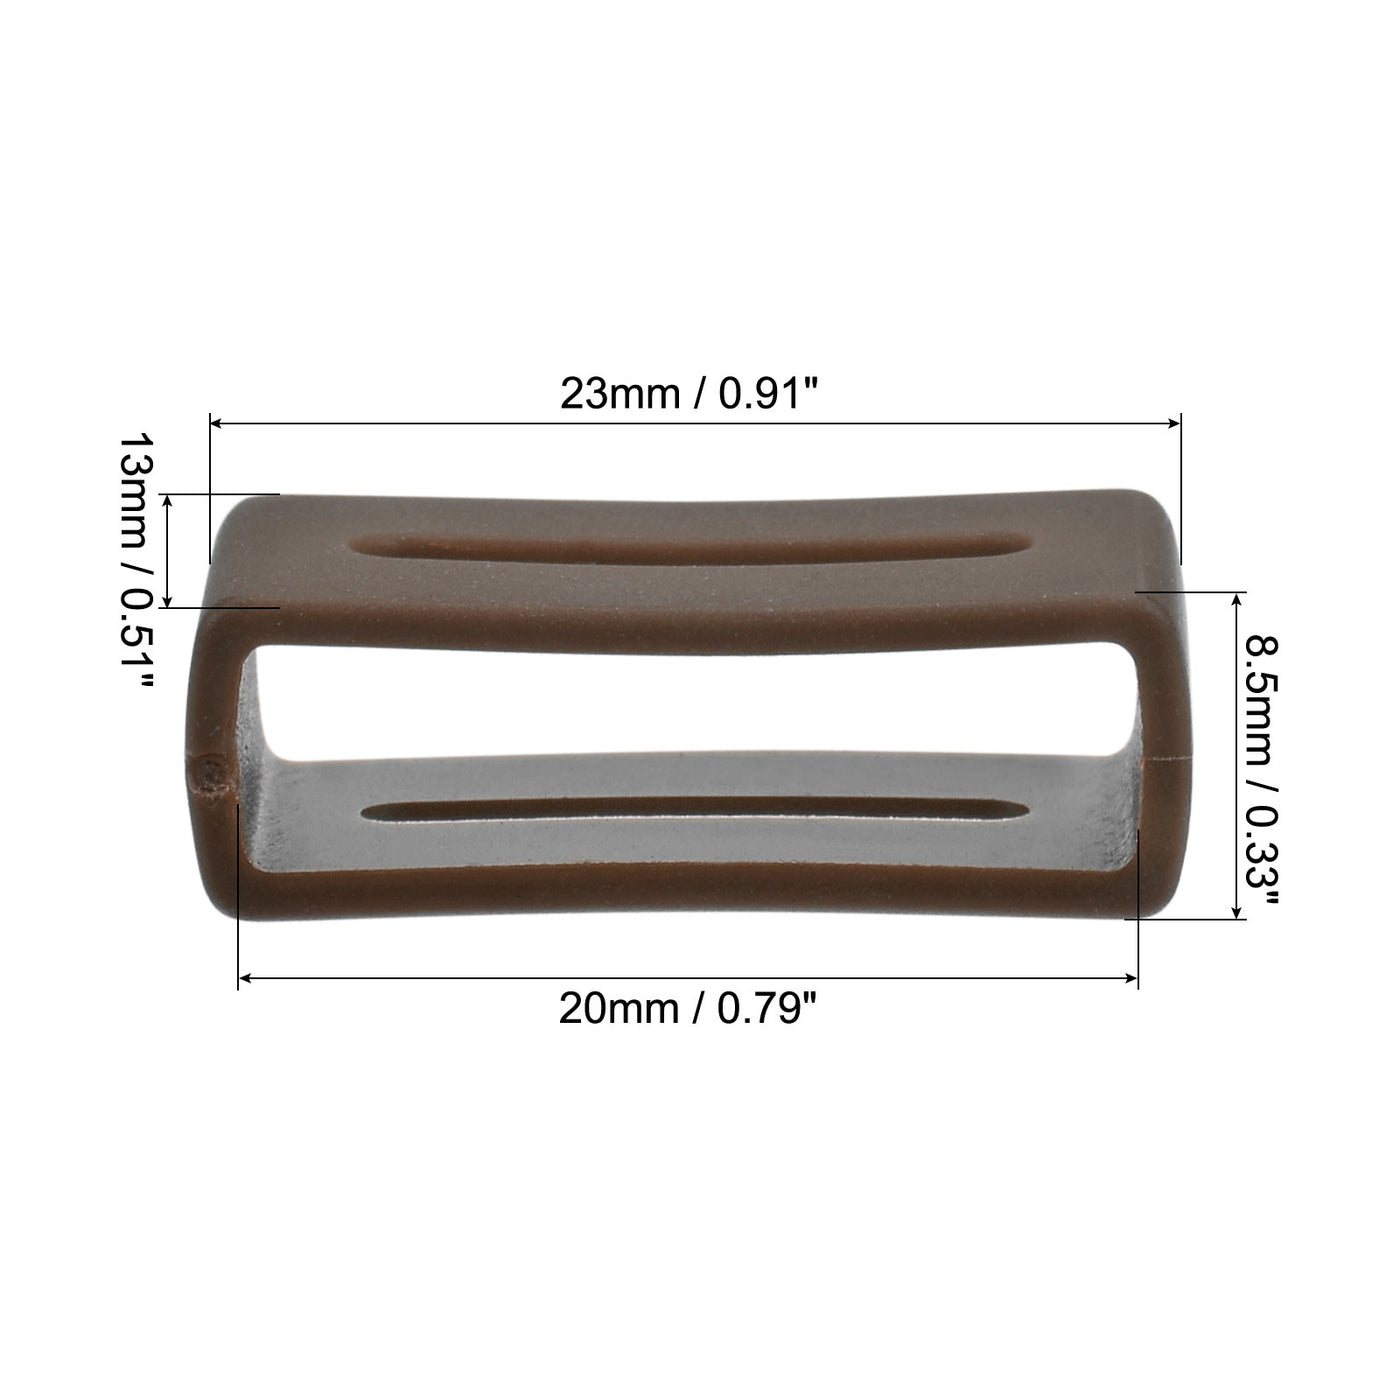 Uxcell Uxcell Watch Band Double-sided Slotted Loops Silicone for 20mm Band, Brown 2 Pcs